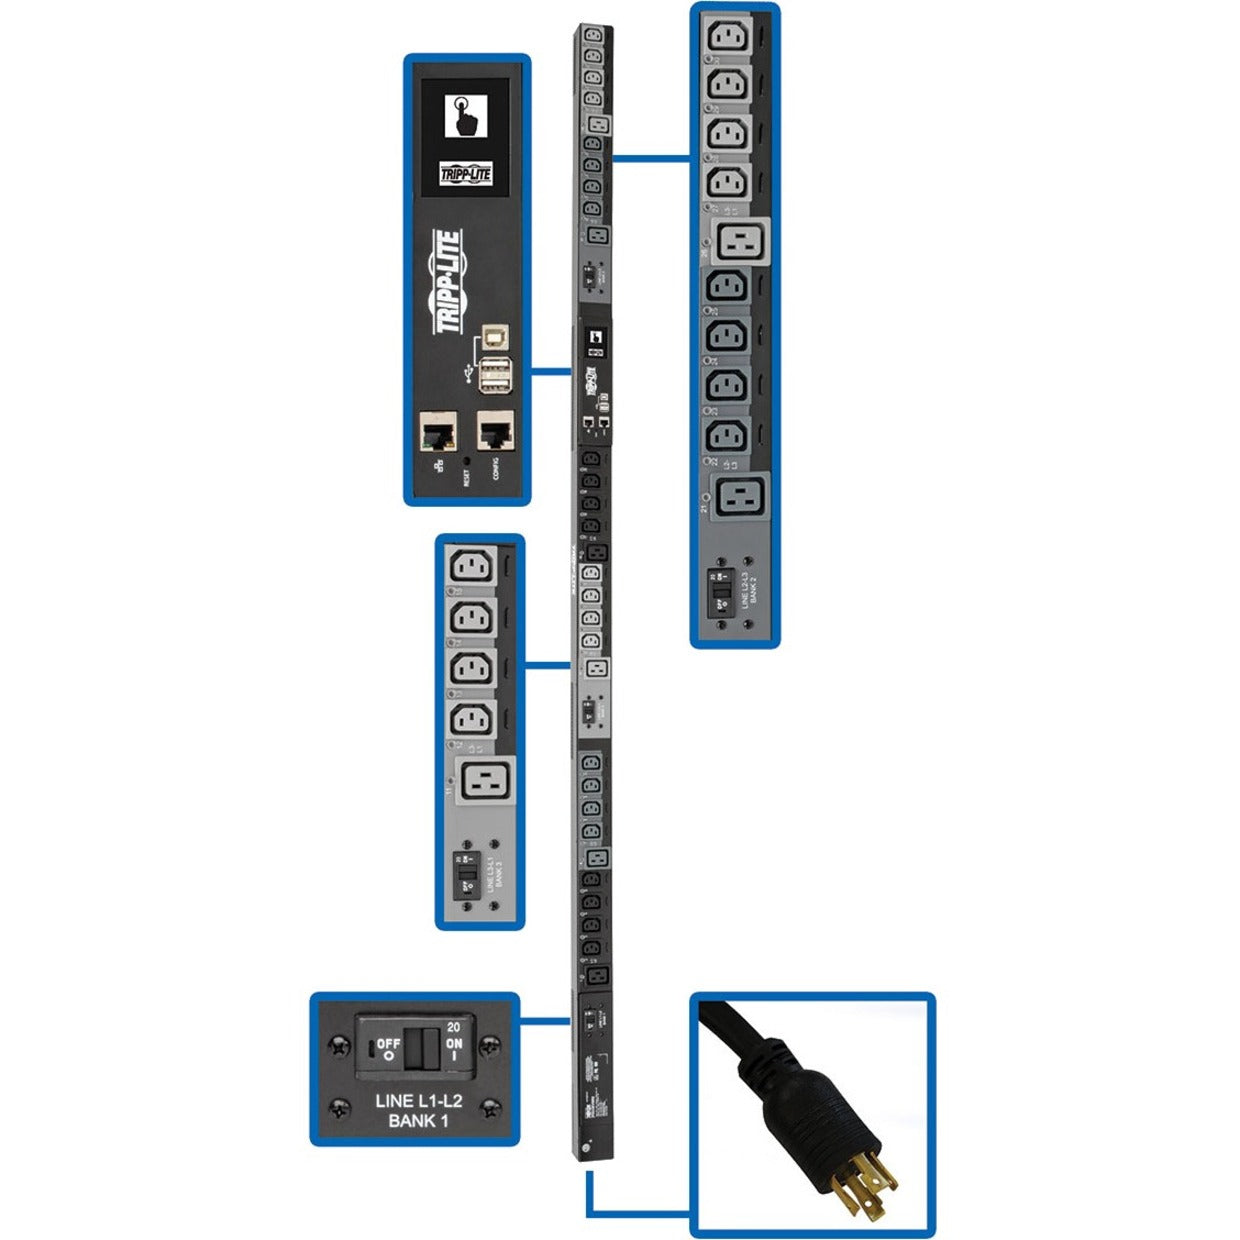 Tripp Lite PDU3EVSR6L2130 30-Outlet PDU 10 kW Power Rating Three Phase Switched Overload Protection 